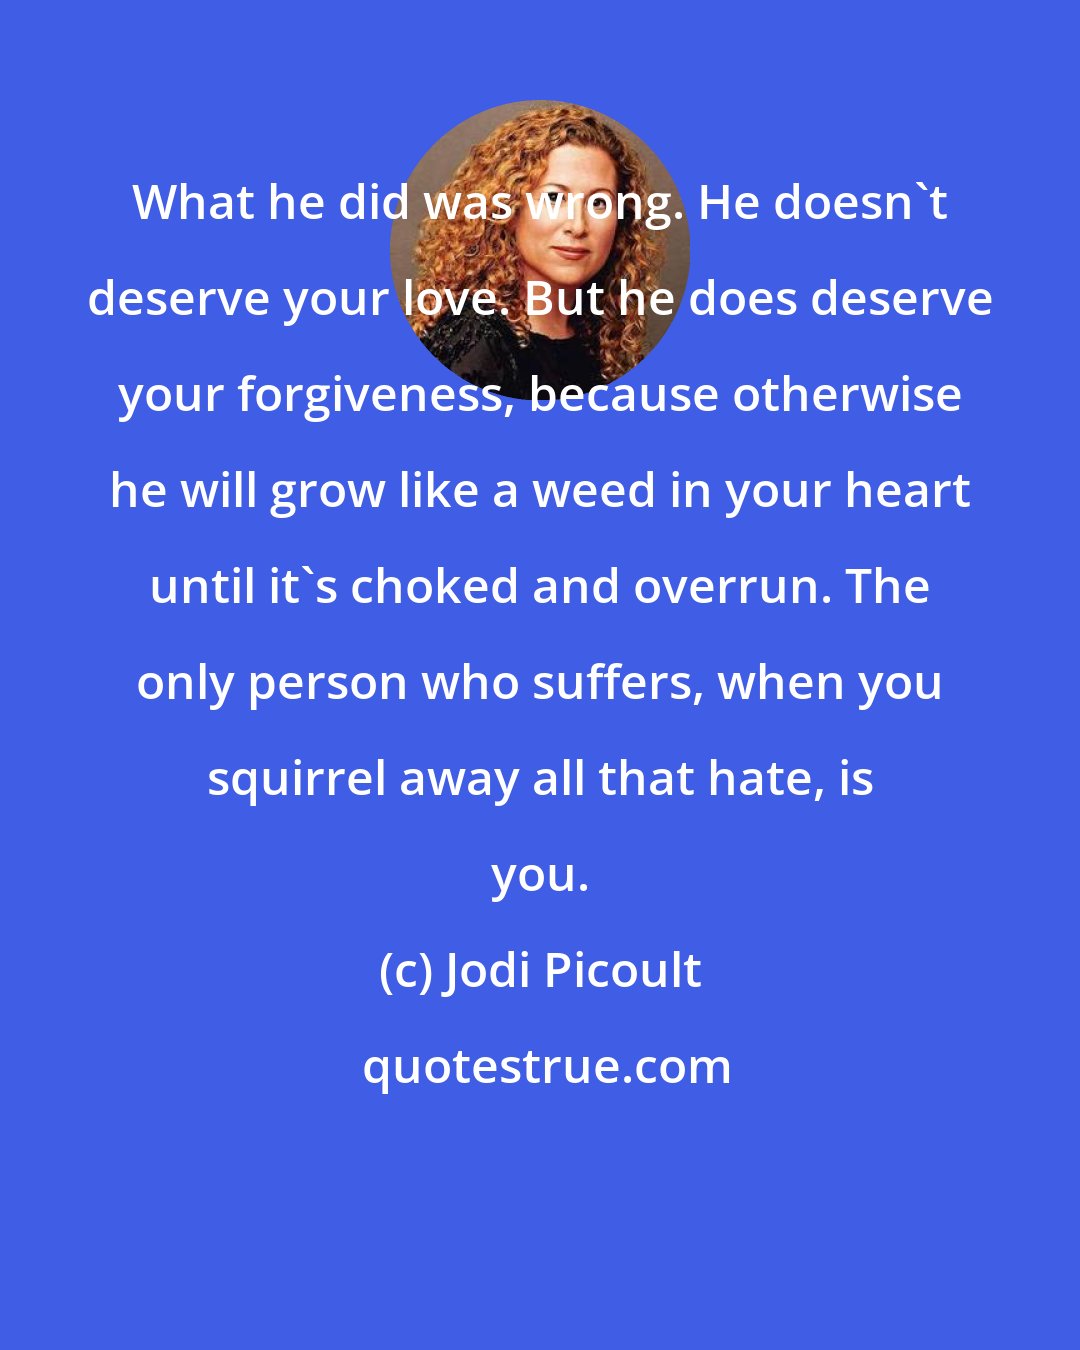 Jodi Picoult: What he did was wrong. He doesn't deserve your love. But he does deserve your forgiveness, because otherwise he will grow like a weed in your heart until it's choked and overrun. The only person who suffers, when you squirrel away all that hate, is you.